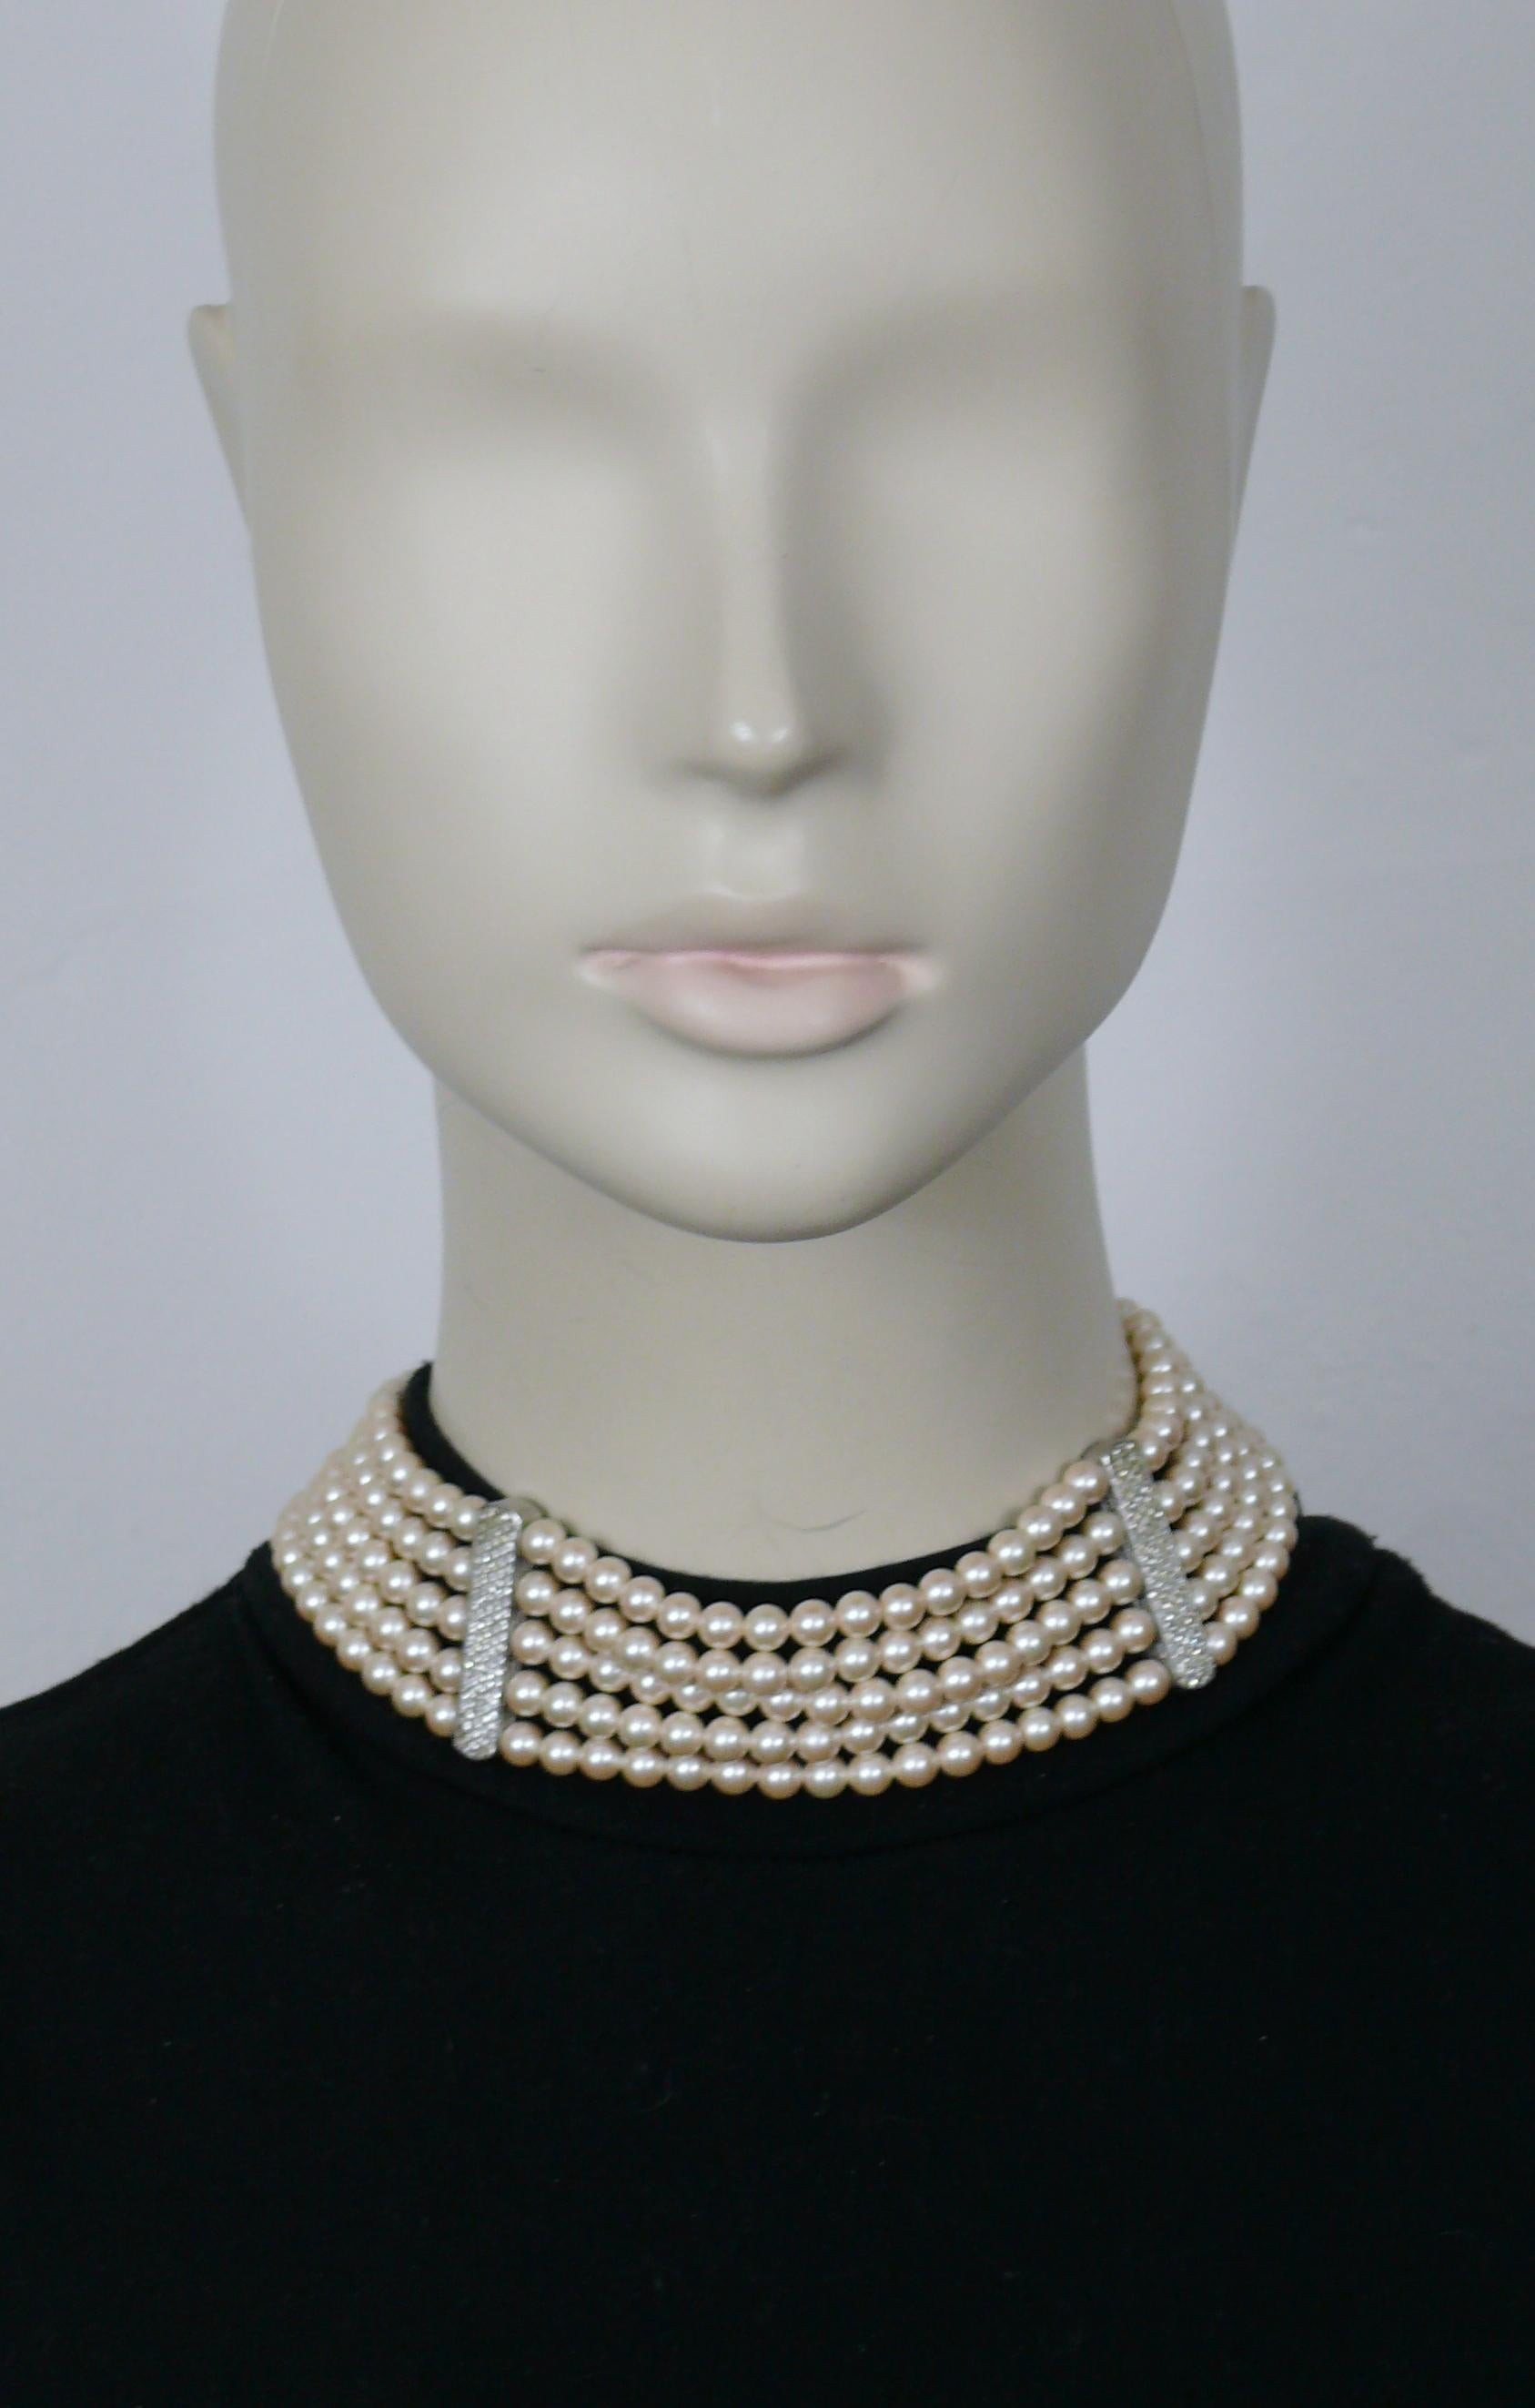 CHRISTIAN DIOR vintage five strand faux pearl necklace embellished with clear crystals.

Lobster clasp closure.
Extension chain.

Embossed CHR. DIOR.

Indicative measurements : length from approx. 38 cm (14.96 inches) to approx. 42 cm (16.54 inches)